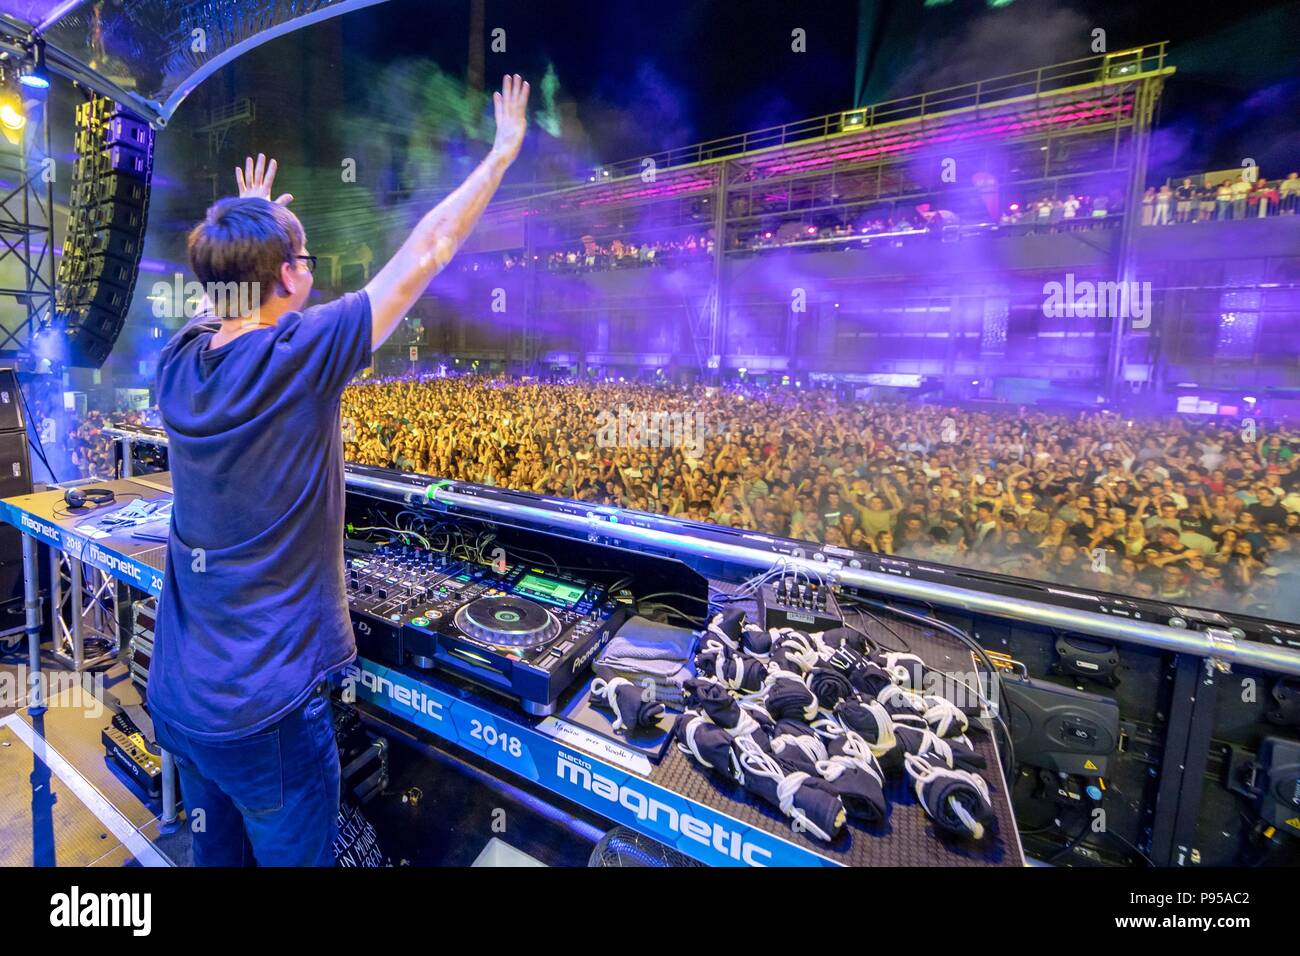 Voelklingen, Germany. 14th July, 2018. DJ Neelix performing at the Electro Magnetic  Festival, which attracted around 10,000 fans of electronic music. - NO WIRE  SERVICE - Credit: Becker & Bredel/dpa/Alamy Live News